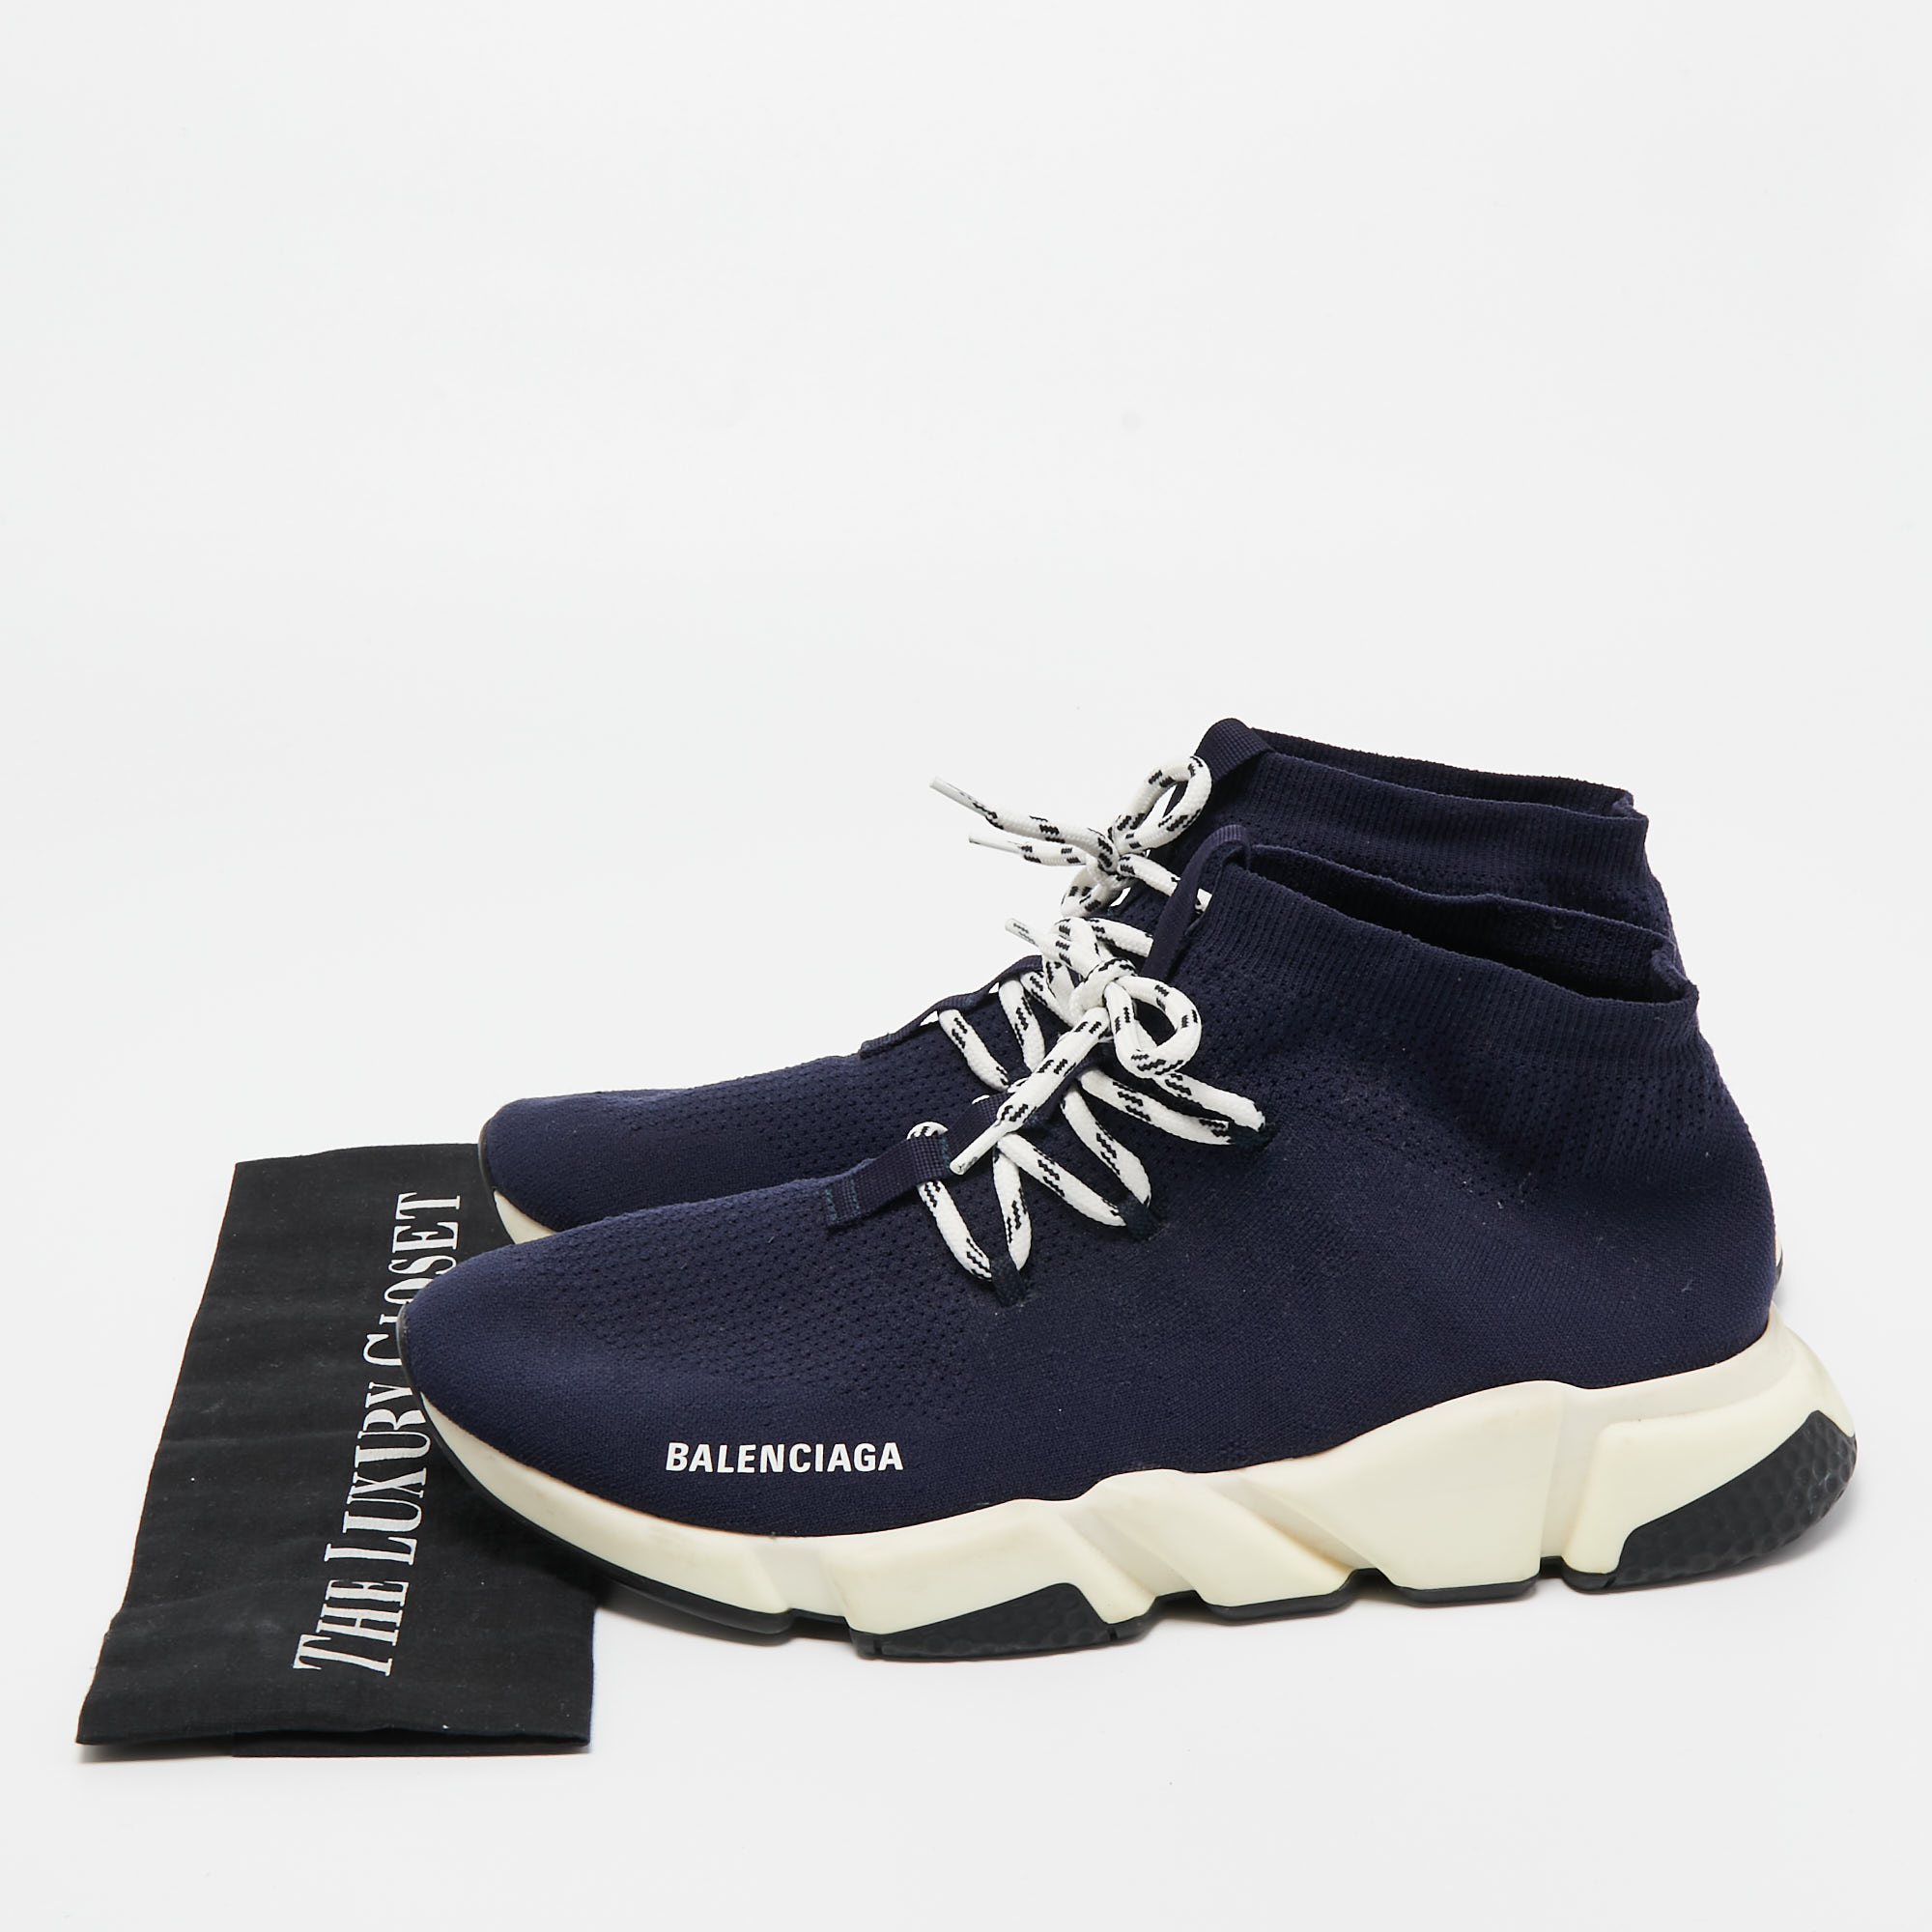 Balenciaga Navy Blue Knit Fabric Speed Trainer Sneakers Size 45